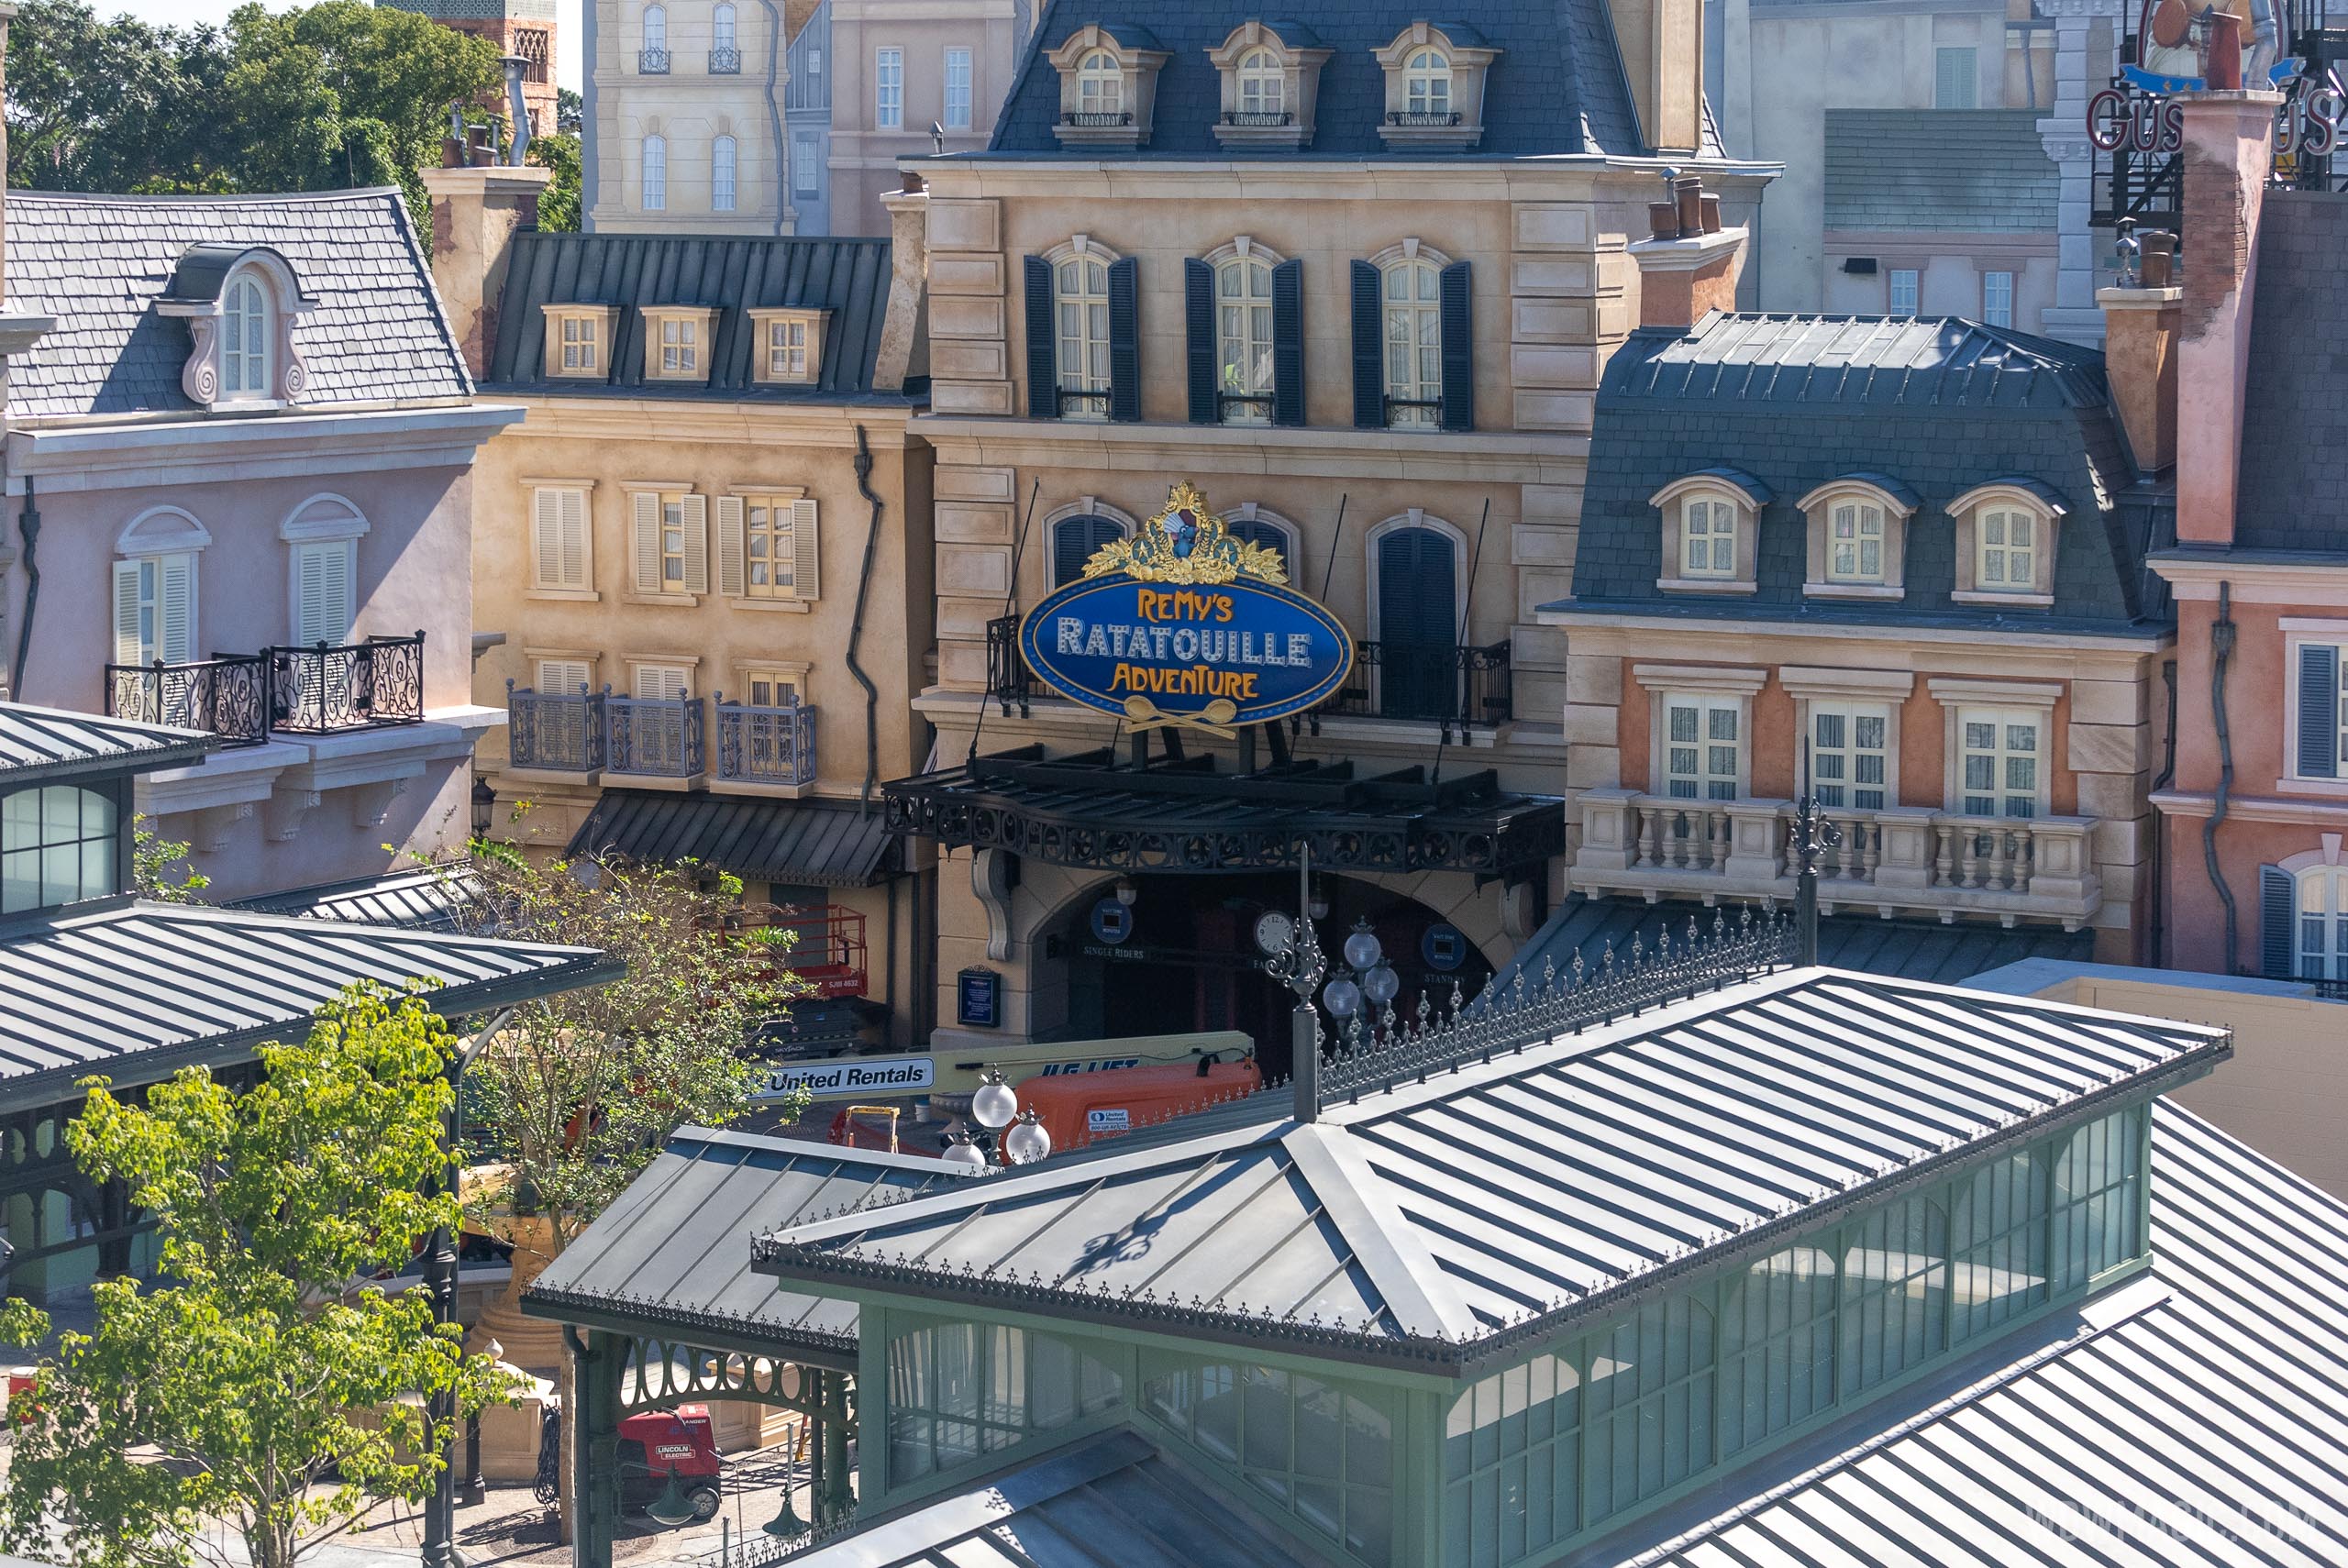 Disney confirms Remy’s Ratatouille Adventure opening will move to 2021